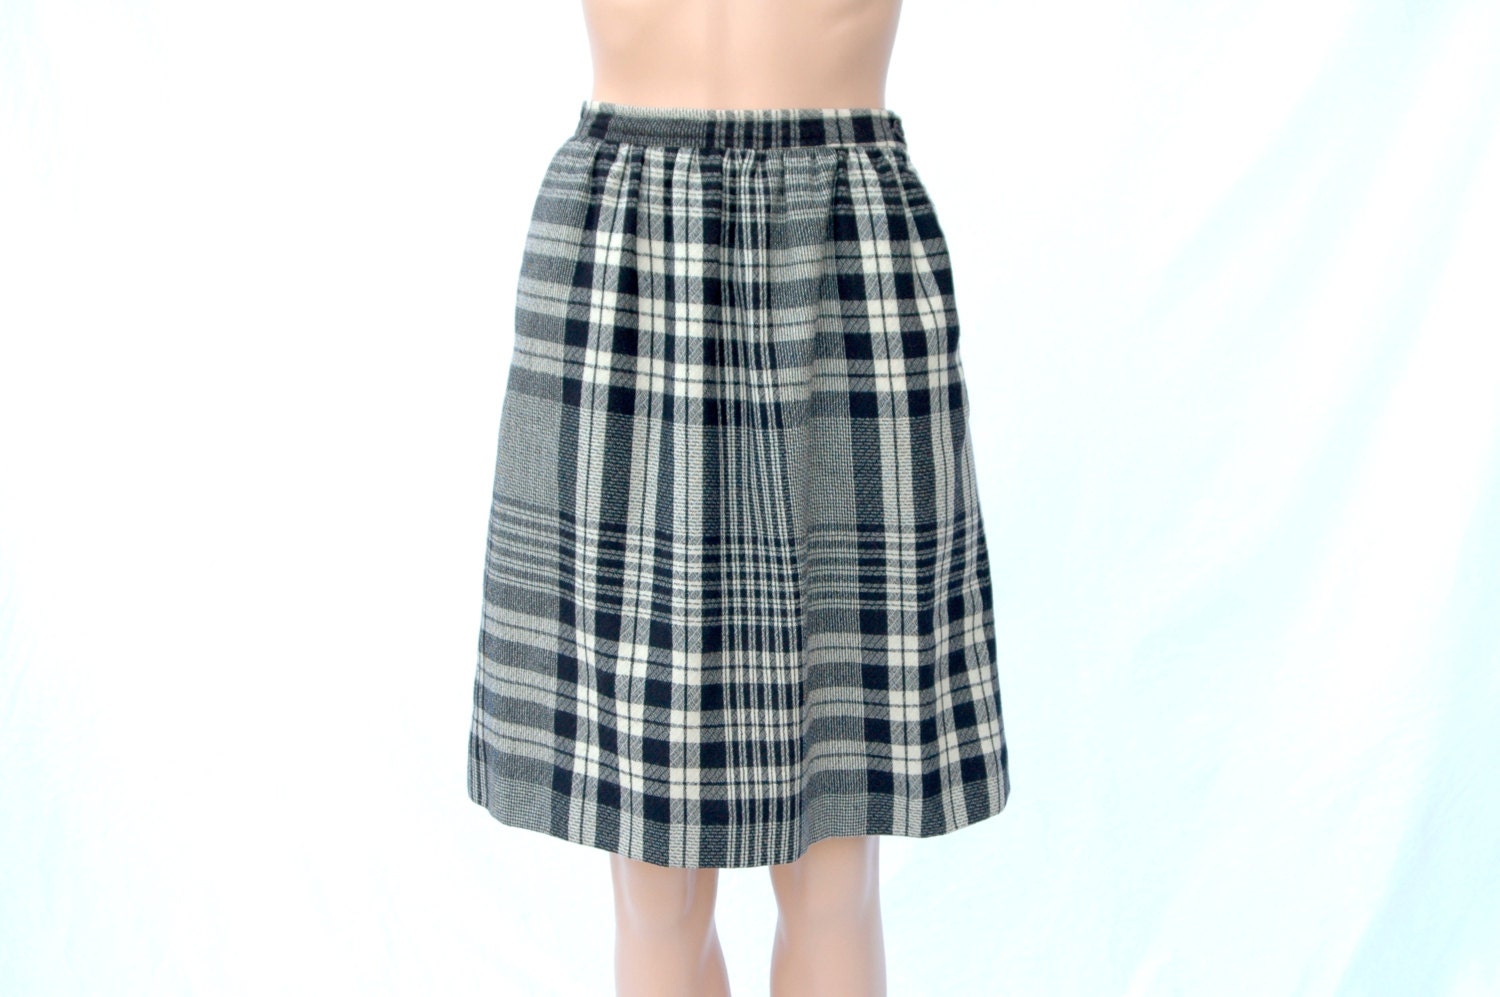 Black and White Plaid Skirt High Waist With Pockets 1970s | Etsy